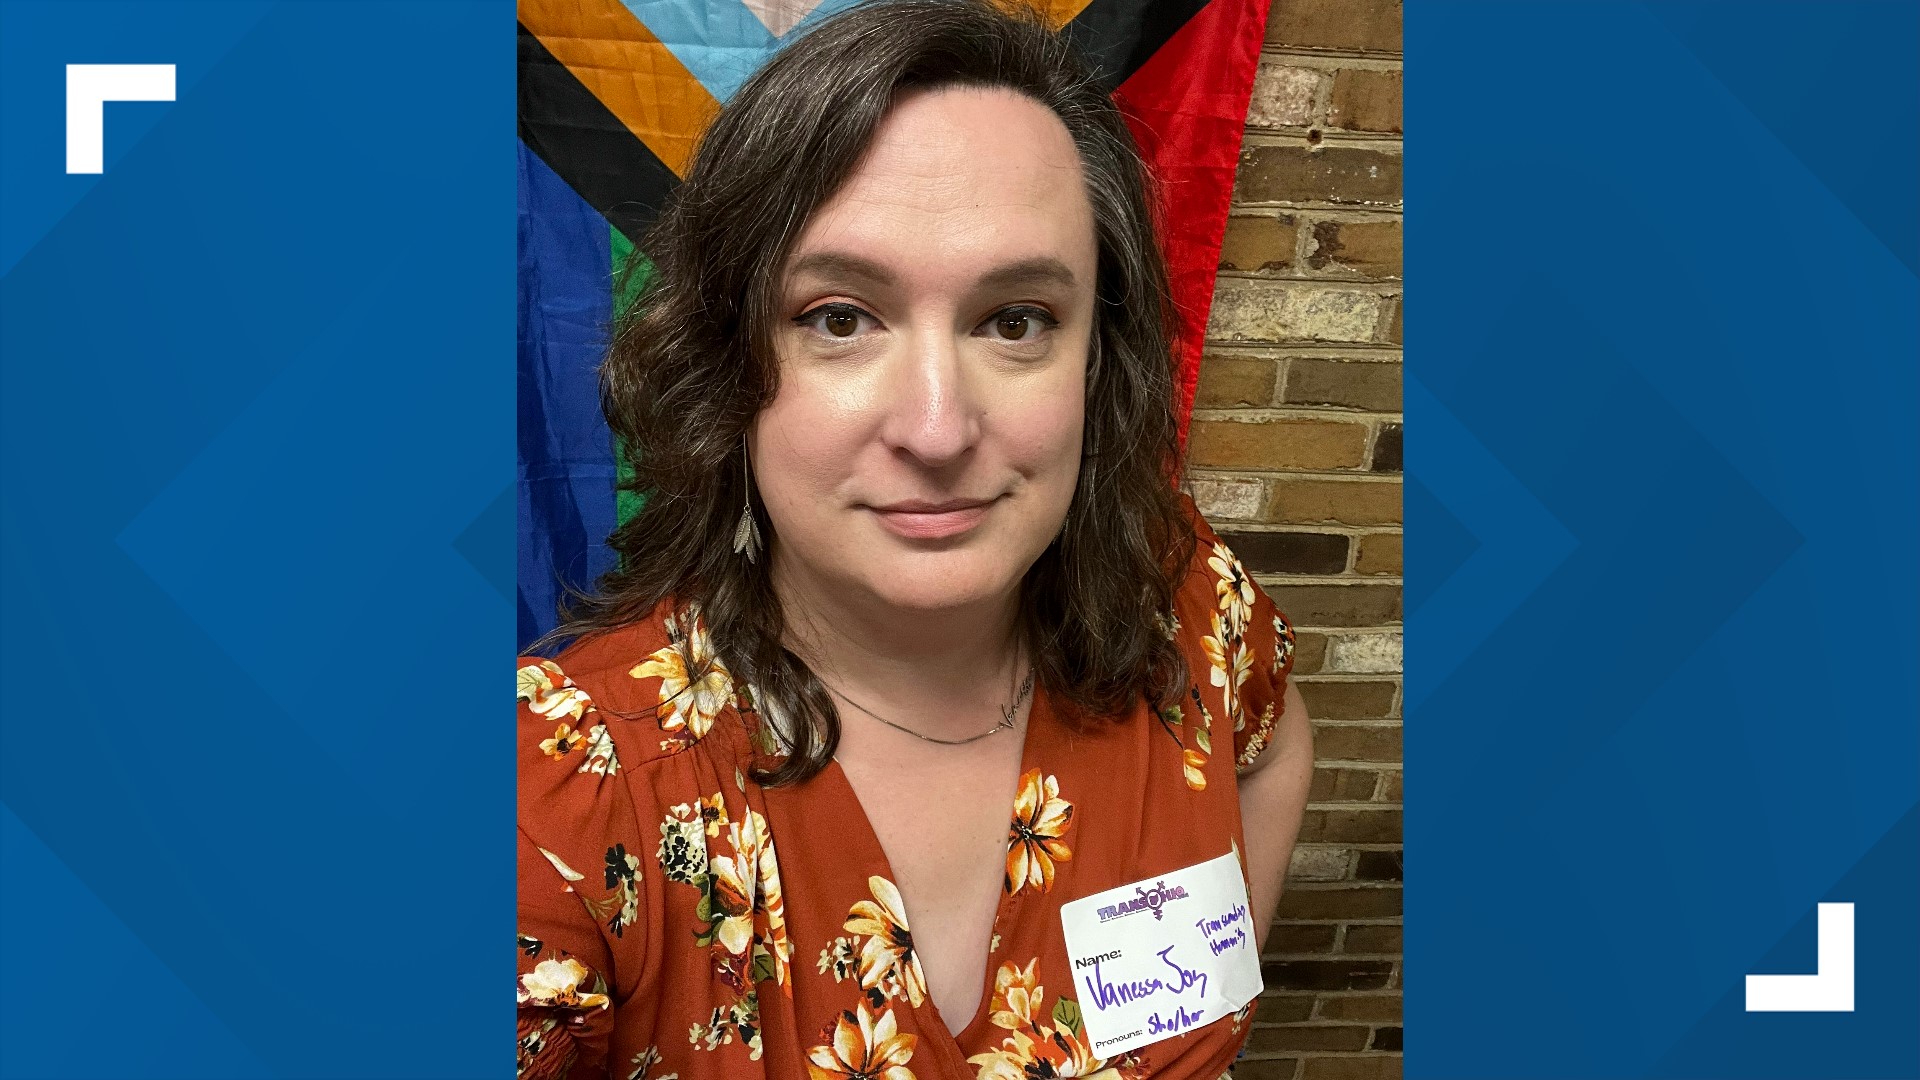 Vanessa Joy of was one of four transgender candidates running for state office in Ohio, largely in response to proposed restrictions of the rights of LGBTQ+ people.